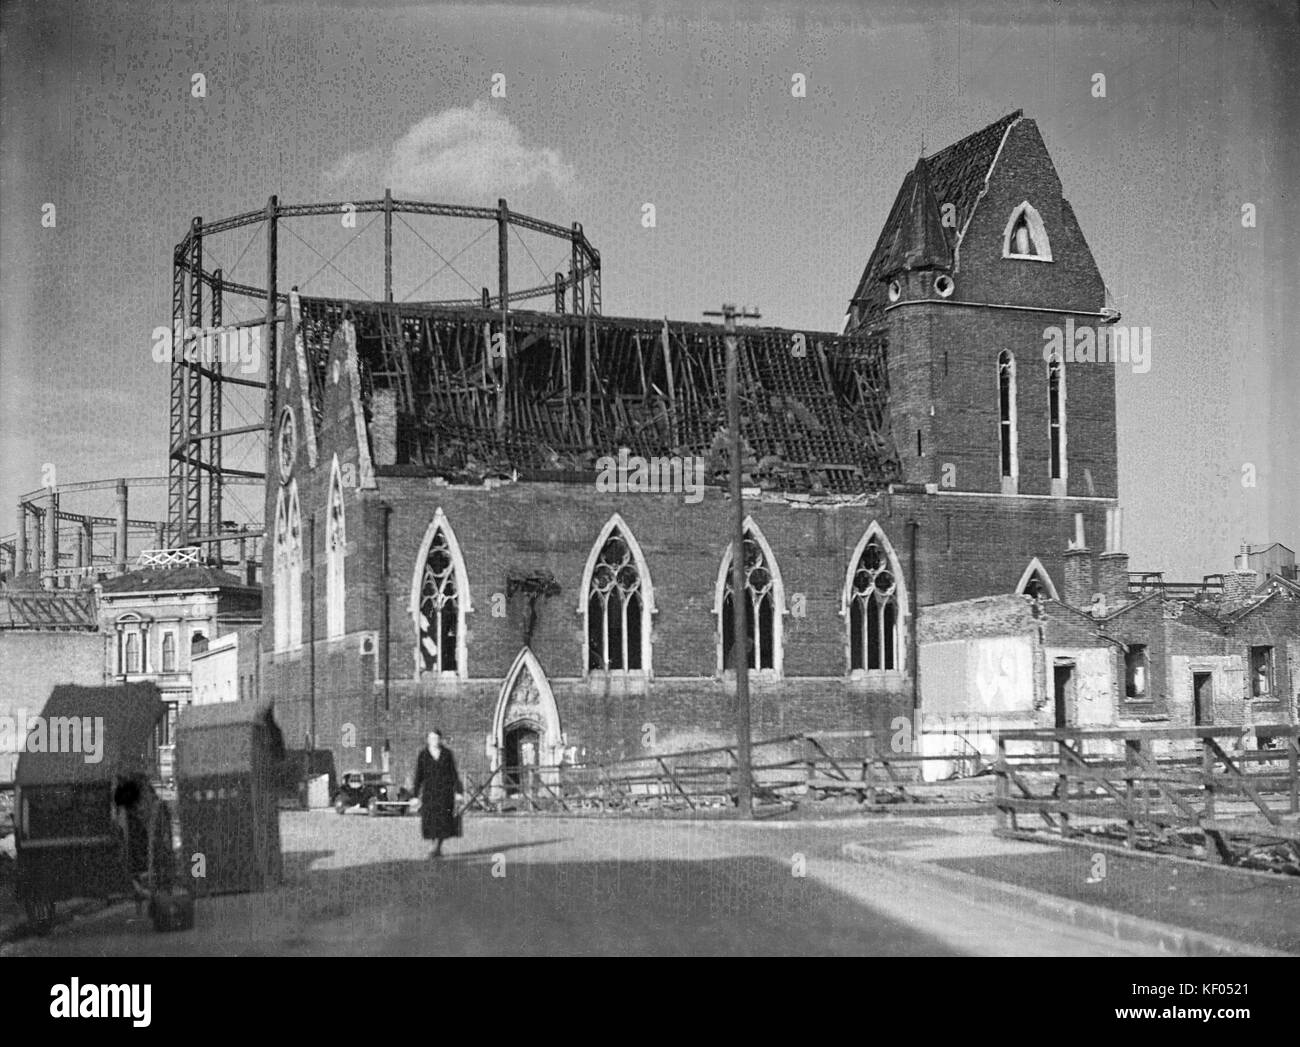 St John's Church, Halley Street, Limehouse, London. The church from the south showing its damaged roof, with gasometers beyond. The church has since b Stock Photo